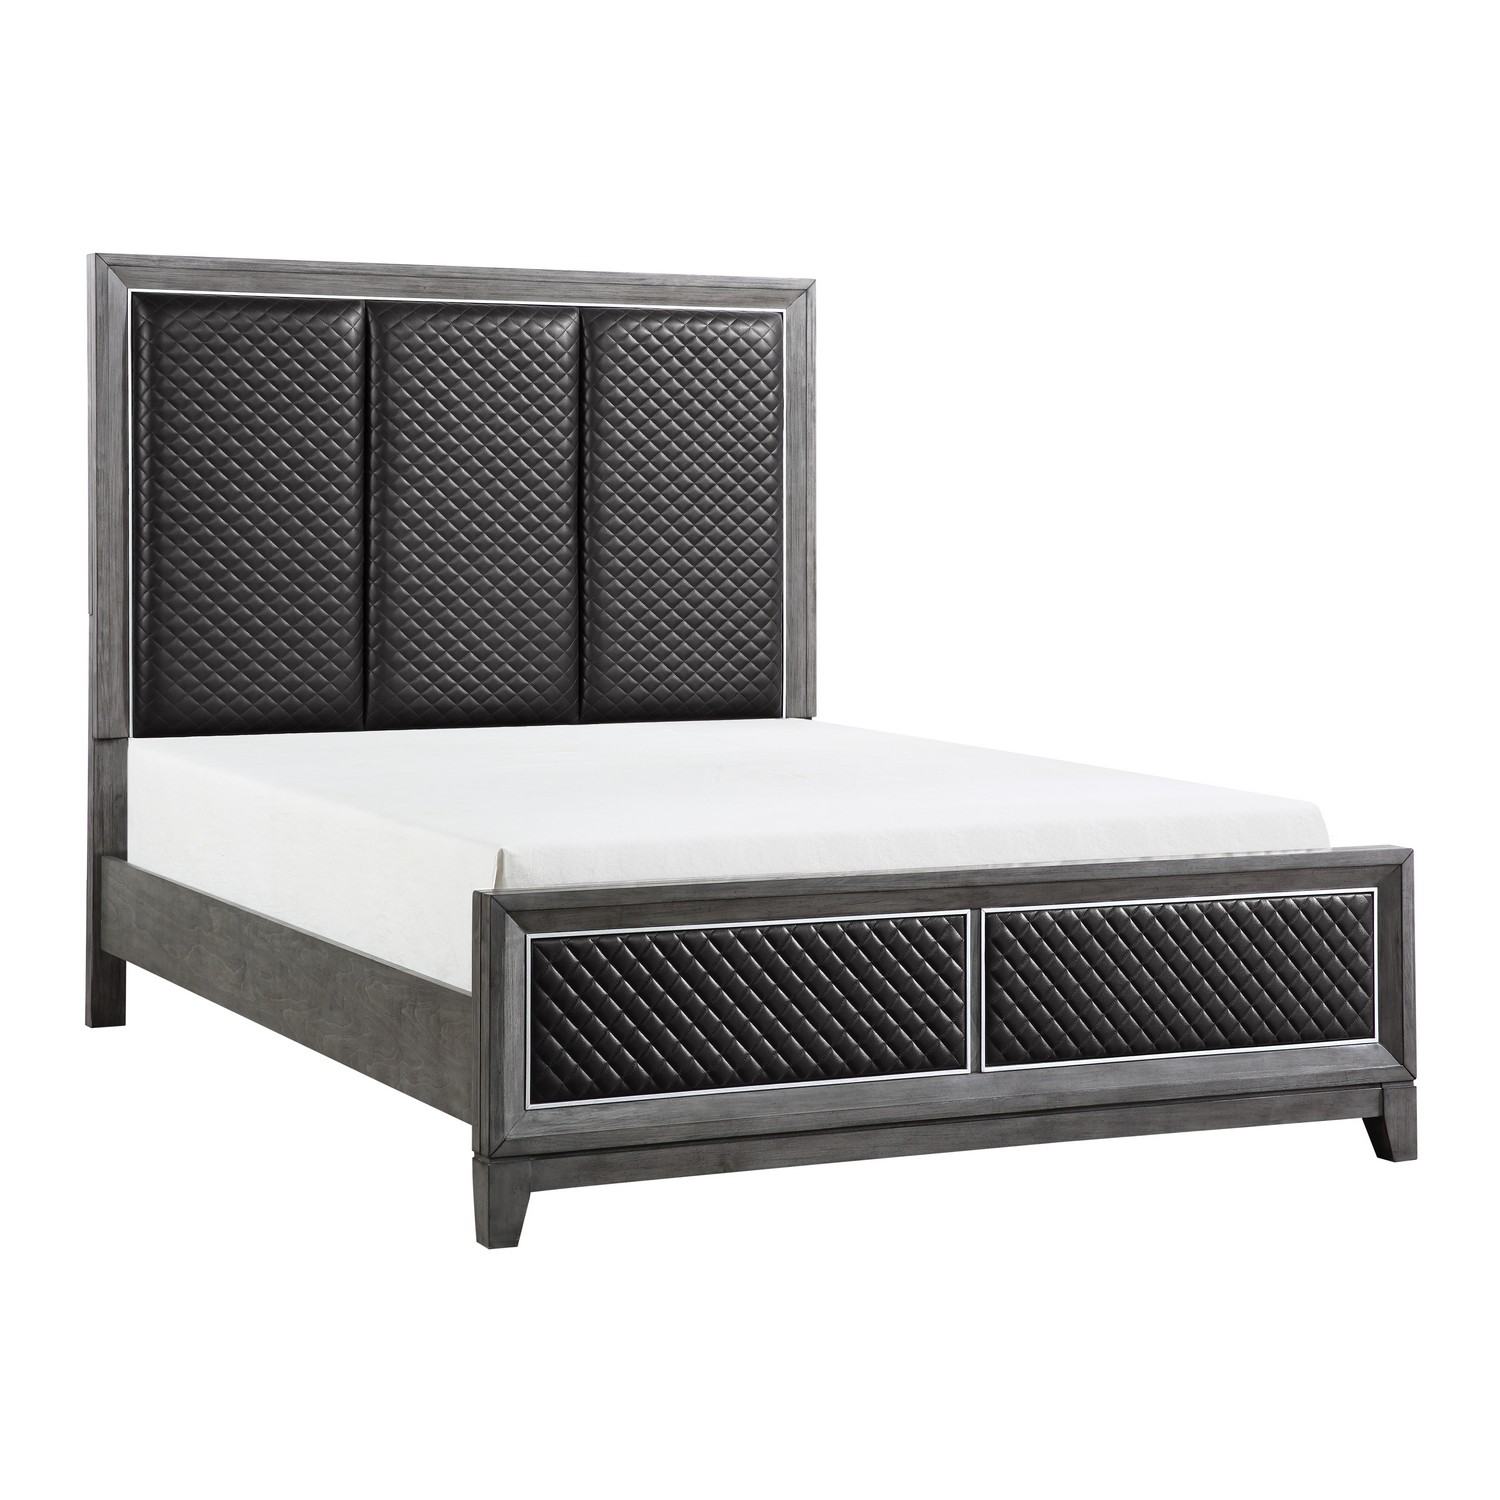 Homelegance West End Bed - Wire-brushed Gray